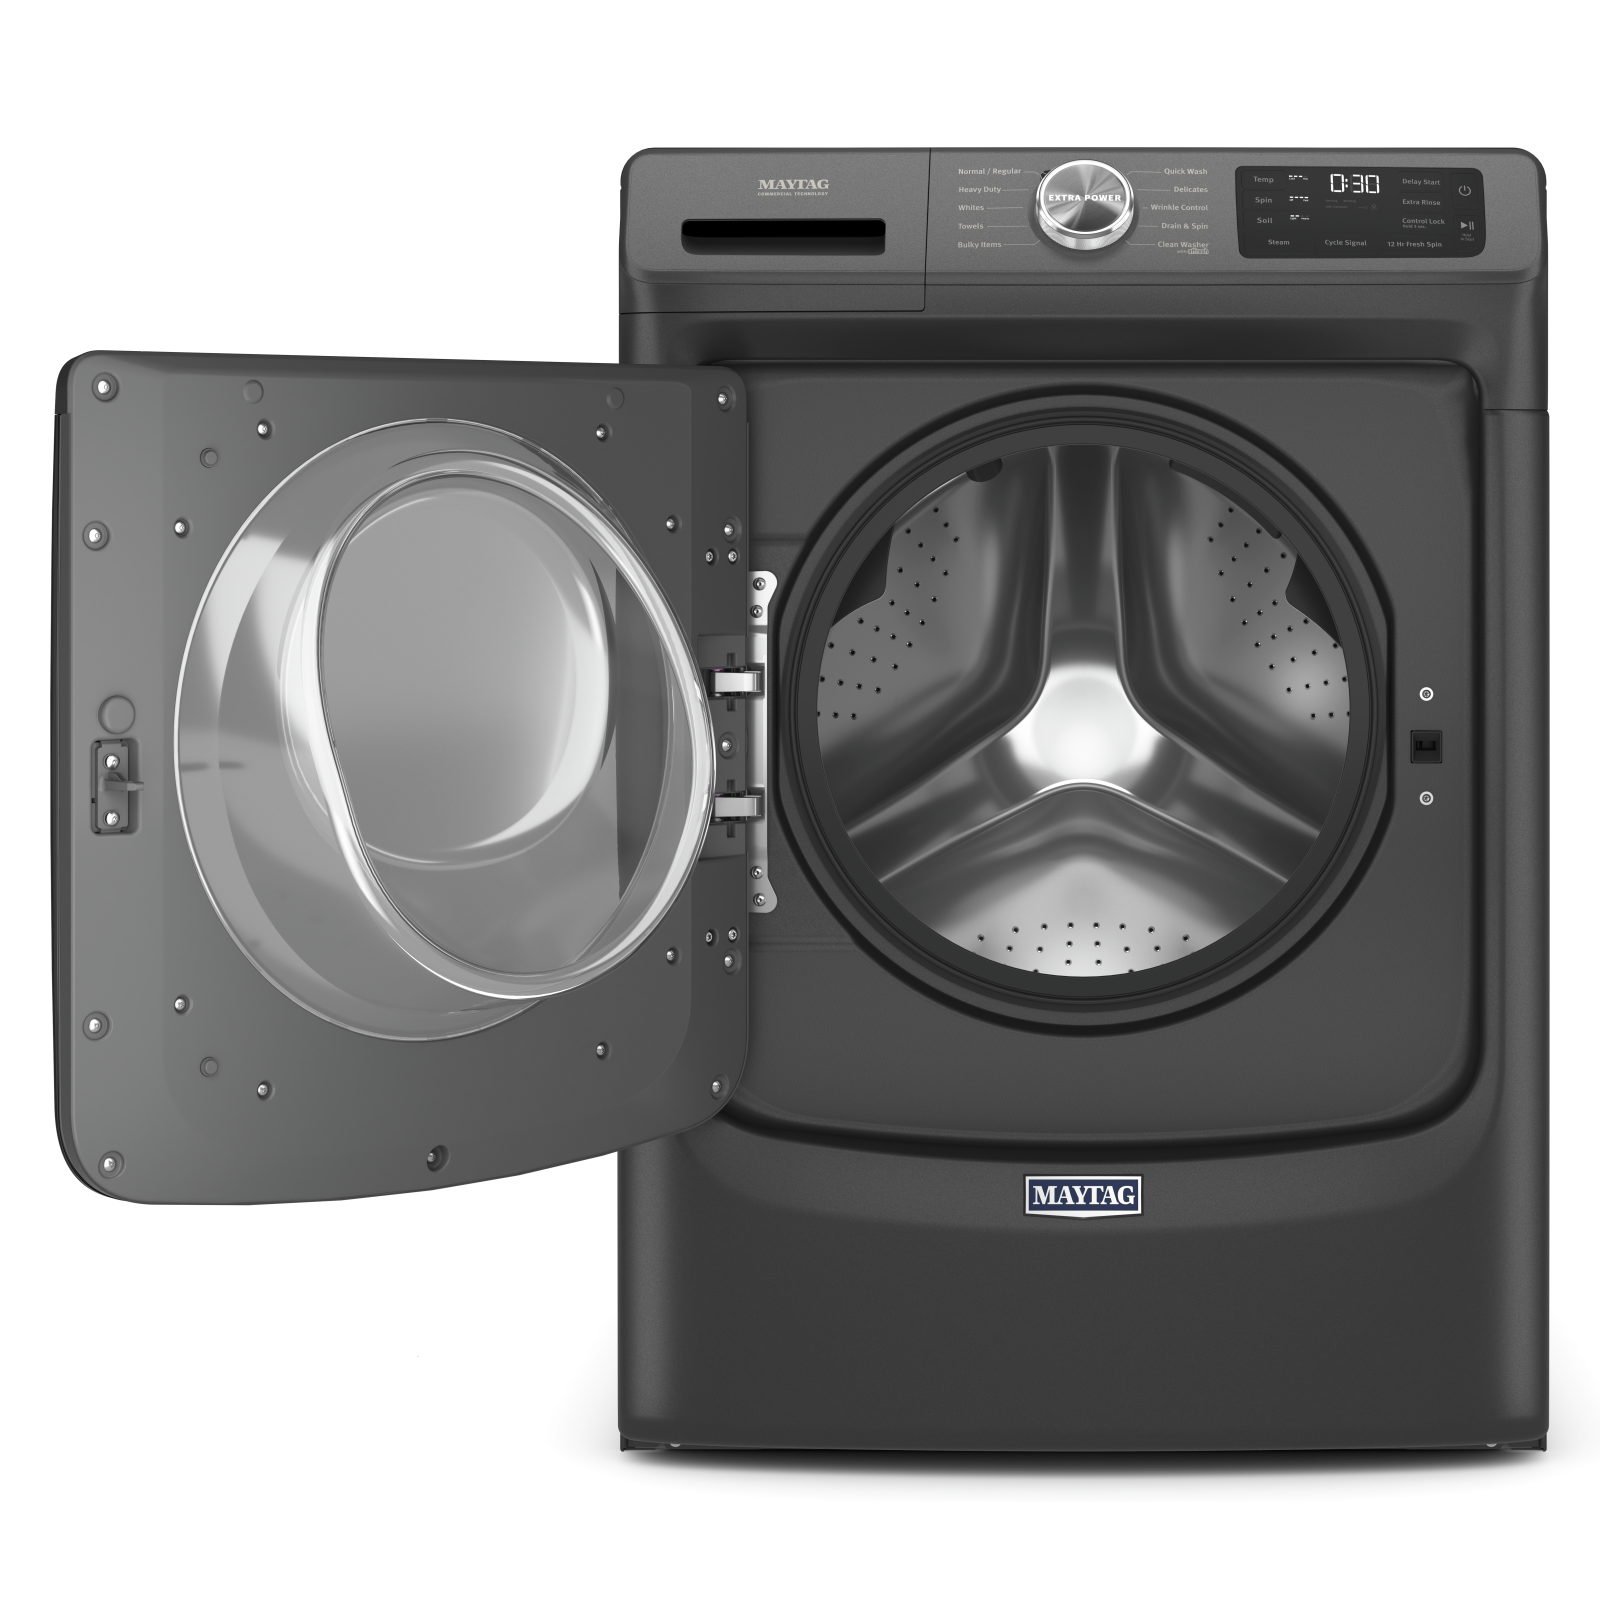 Maytag - 5.2 cu. Ft  Front Load Washer in Black - MHW5630MBK